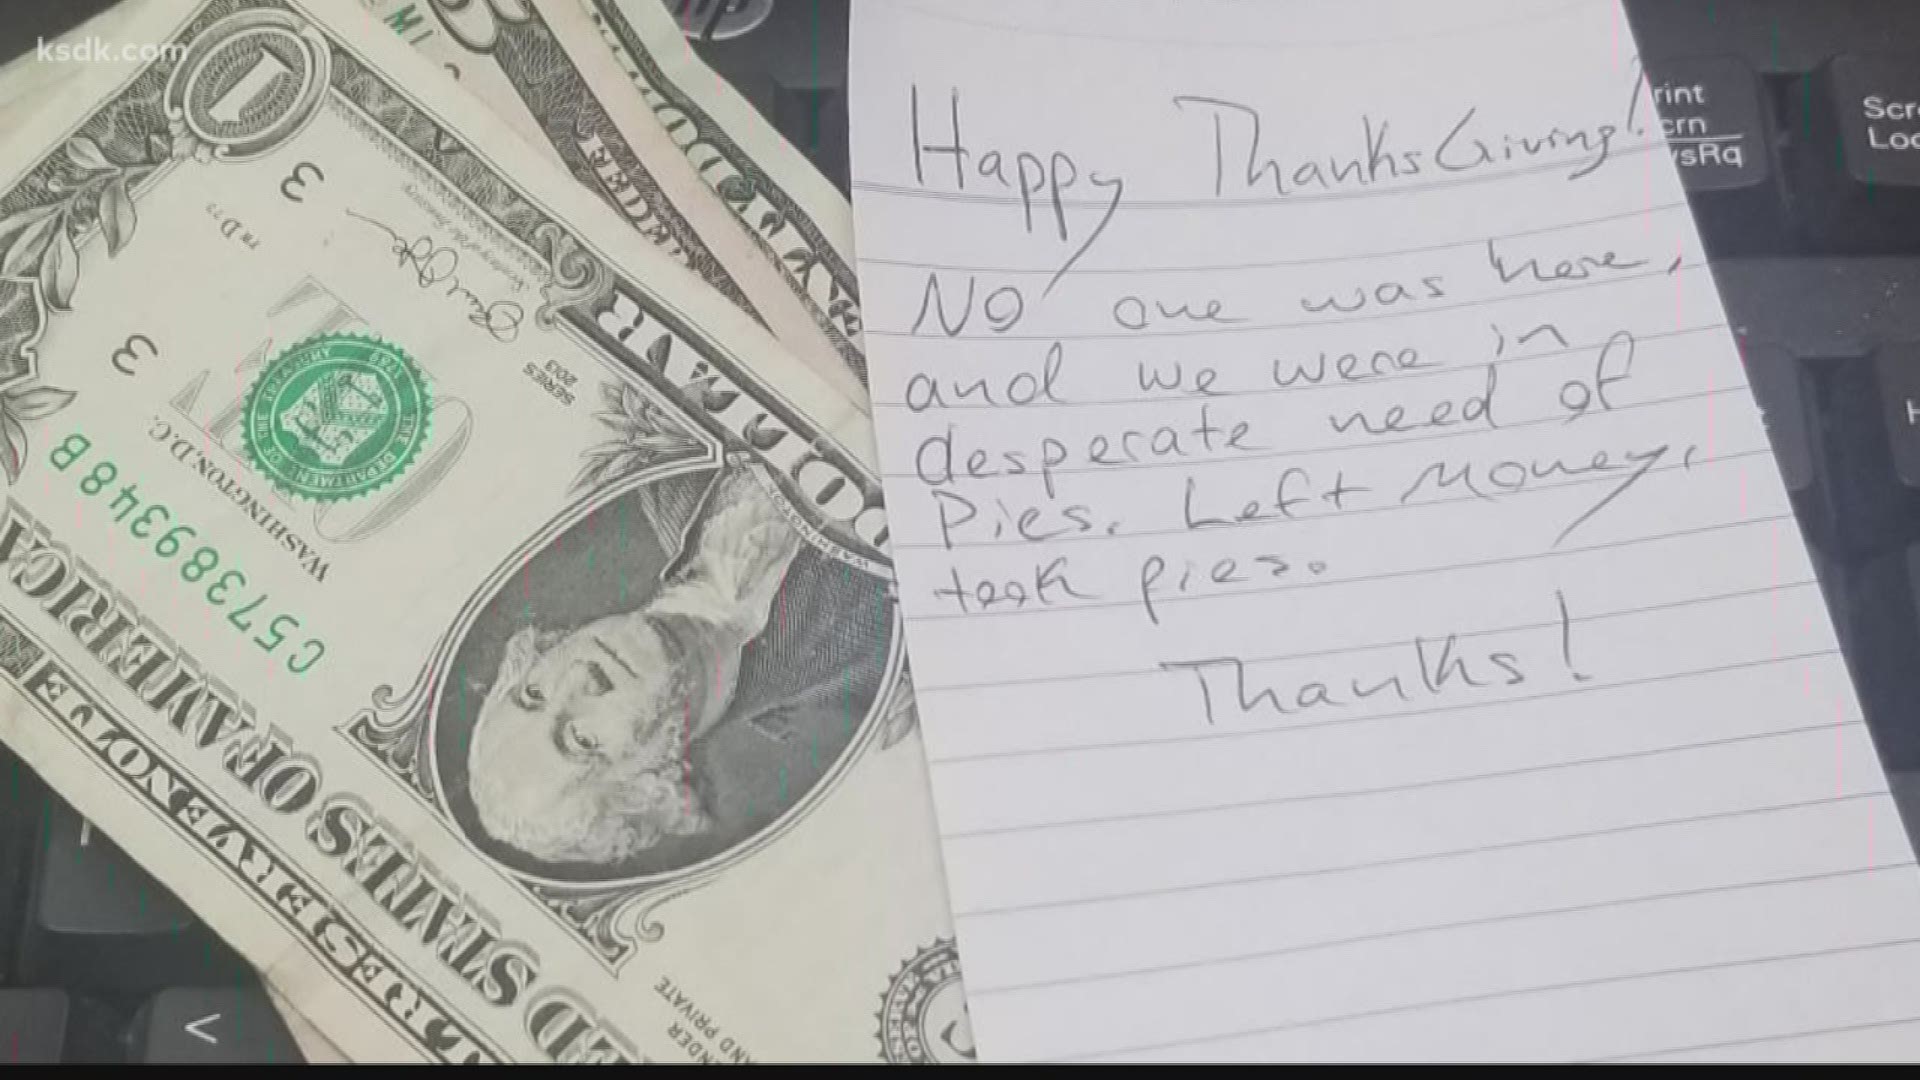 ‘Happy Thanksgiving! No one was here and we were in desperate need of pies, left money, took pies. Thanks!’ The note said